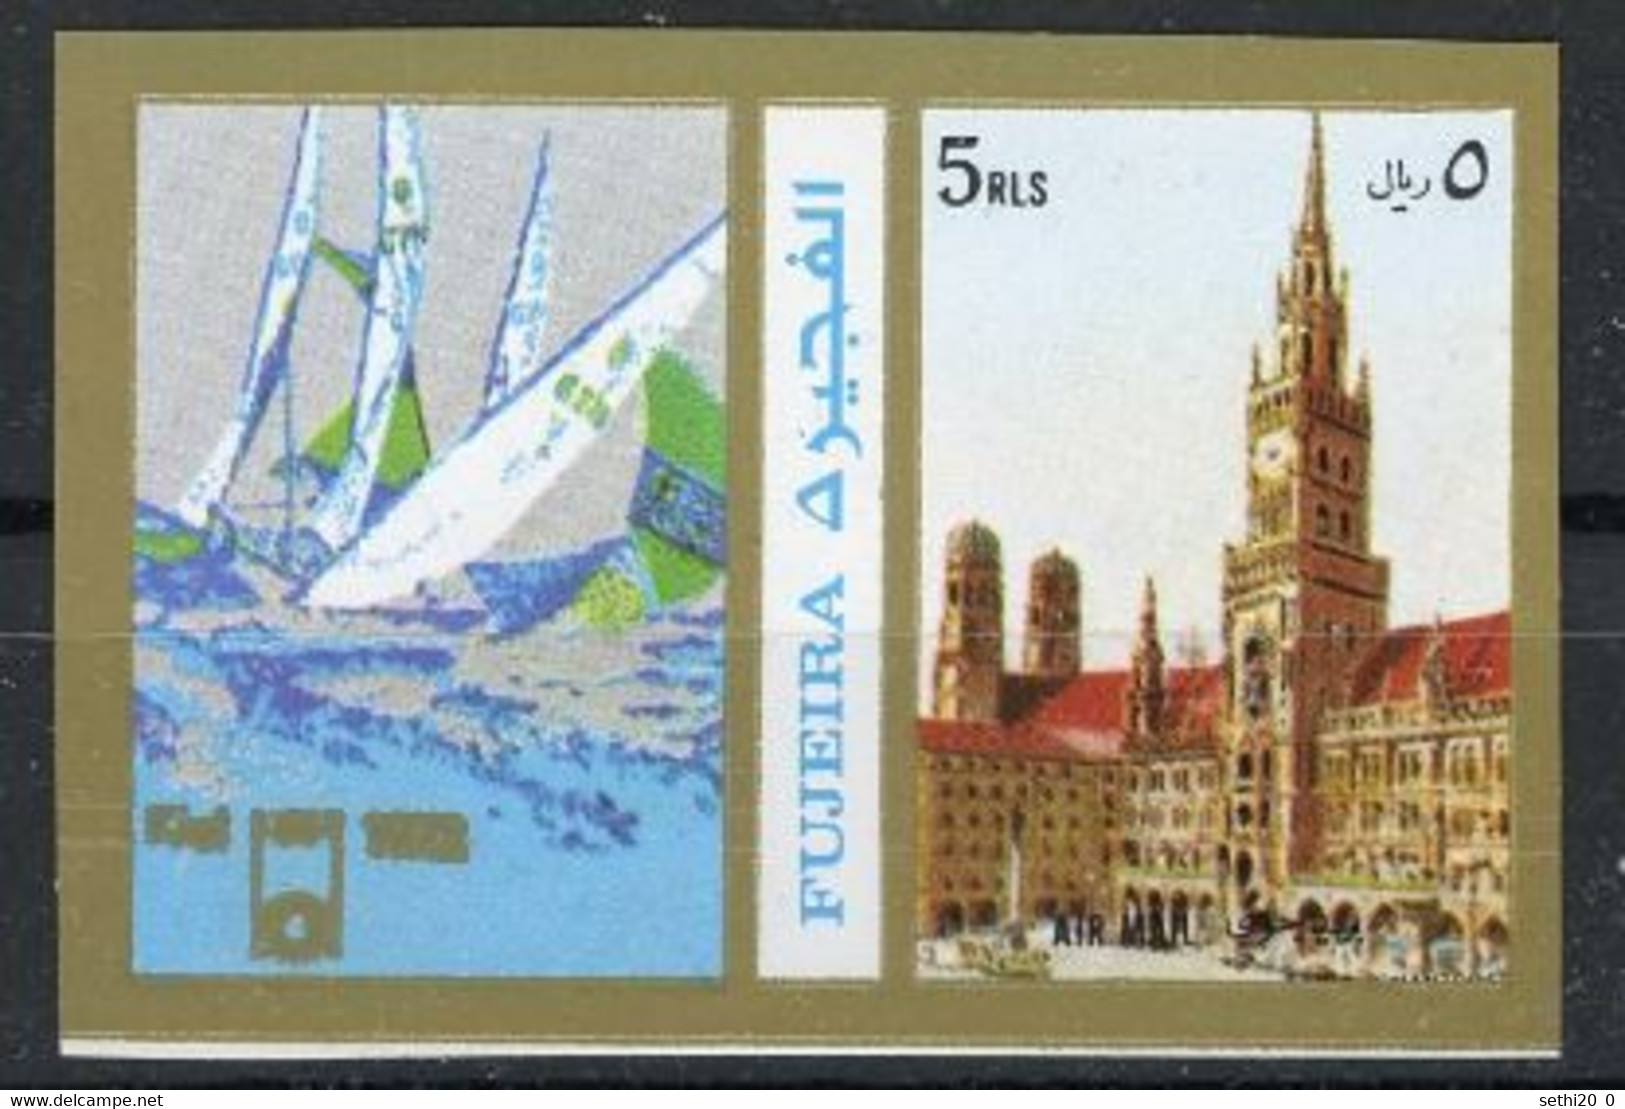 Fujeira 1968 Voile Imperf  MNH - Summer 1904: St. Louis